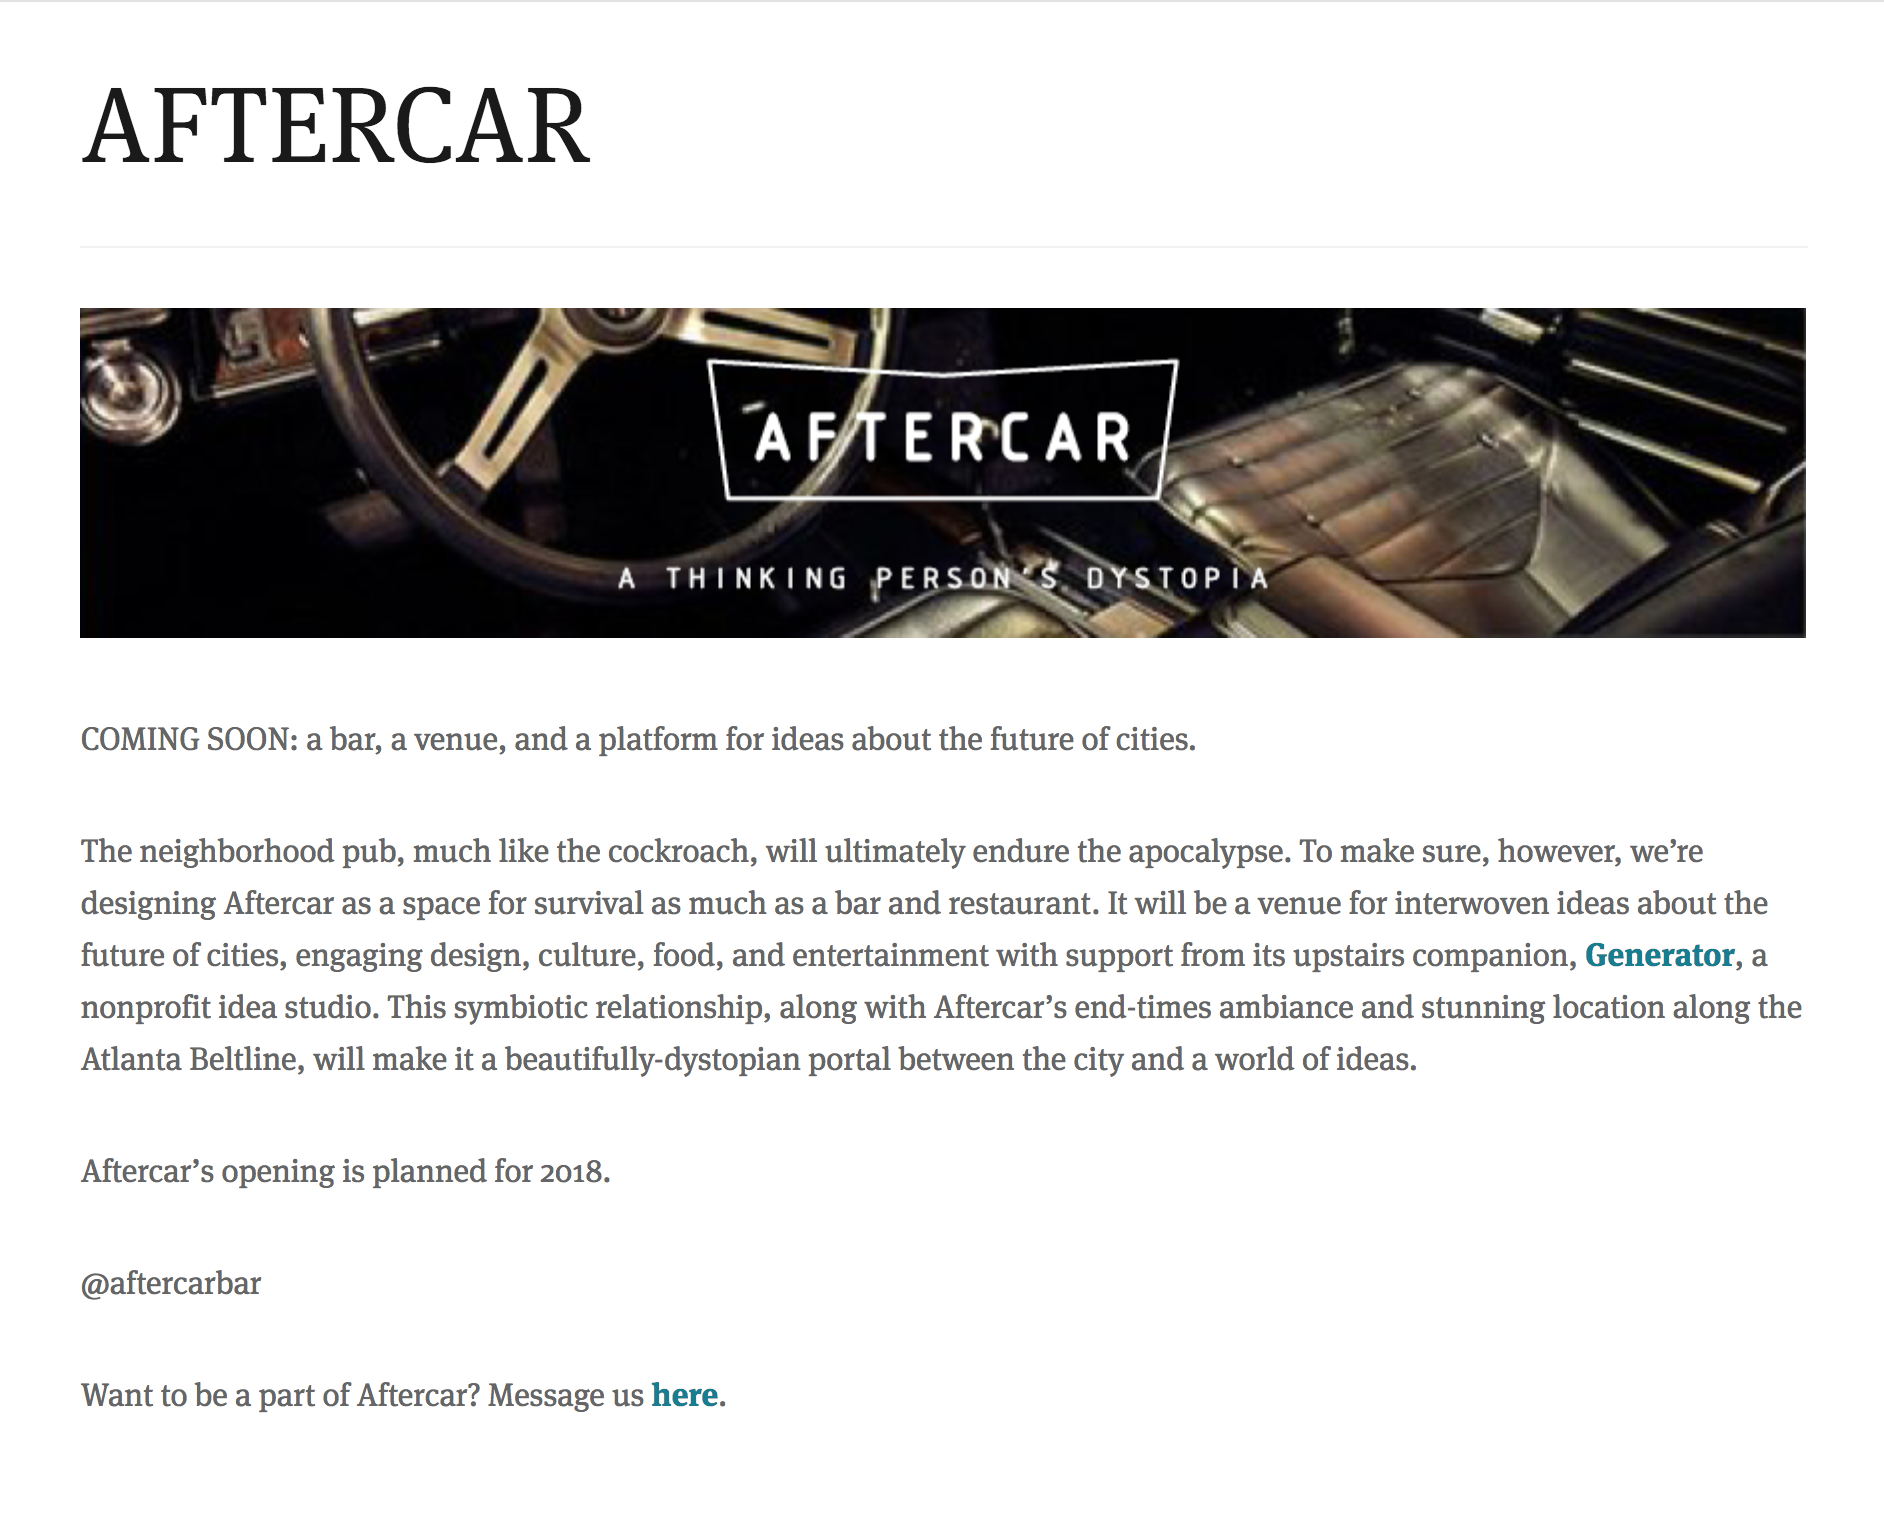 Aftercar: A Thinking Person's Dystopia